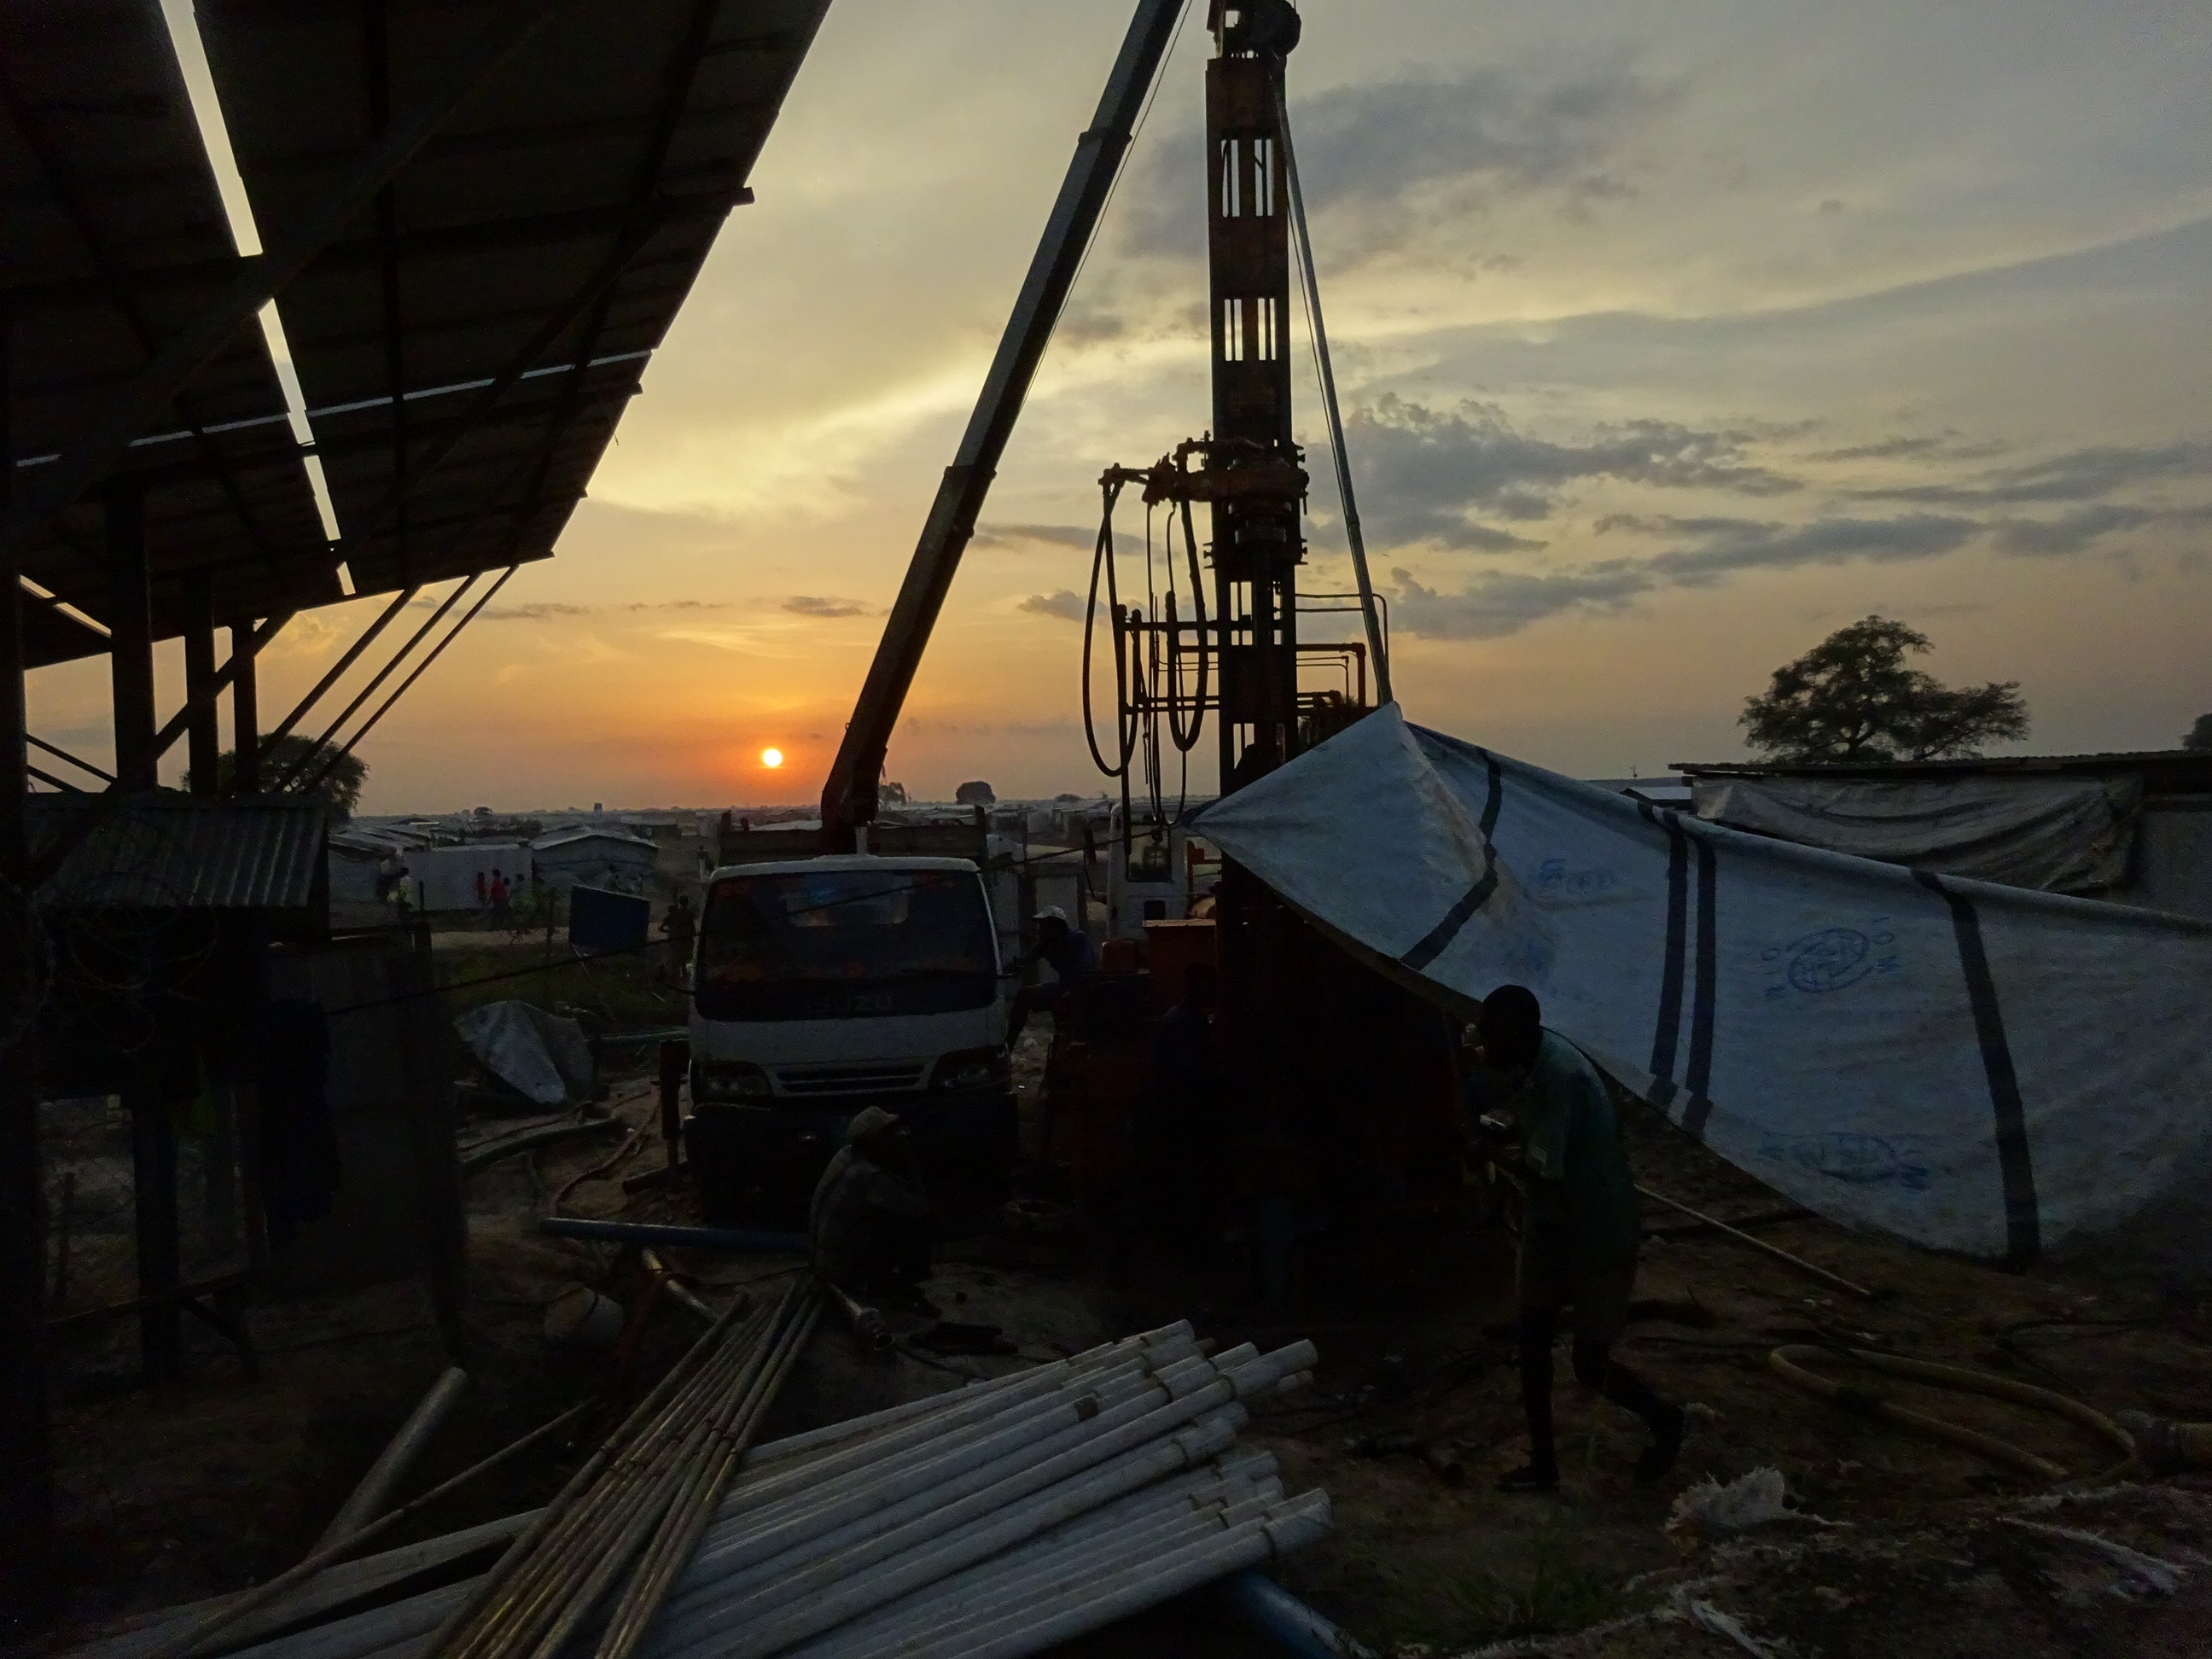 drilling boreholes at sunset